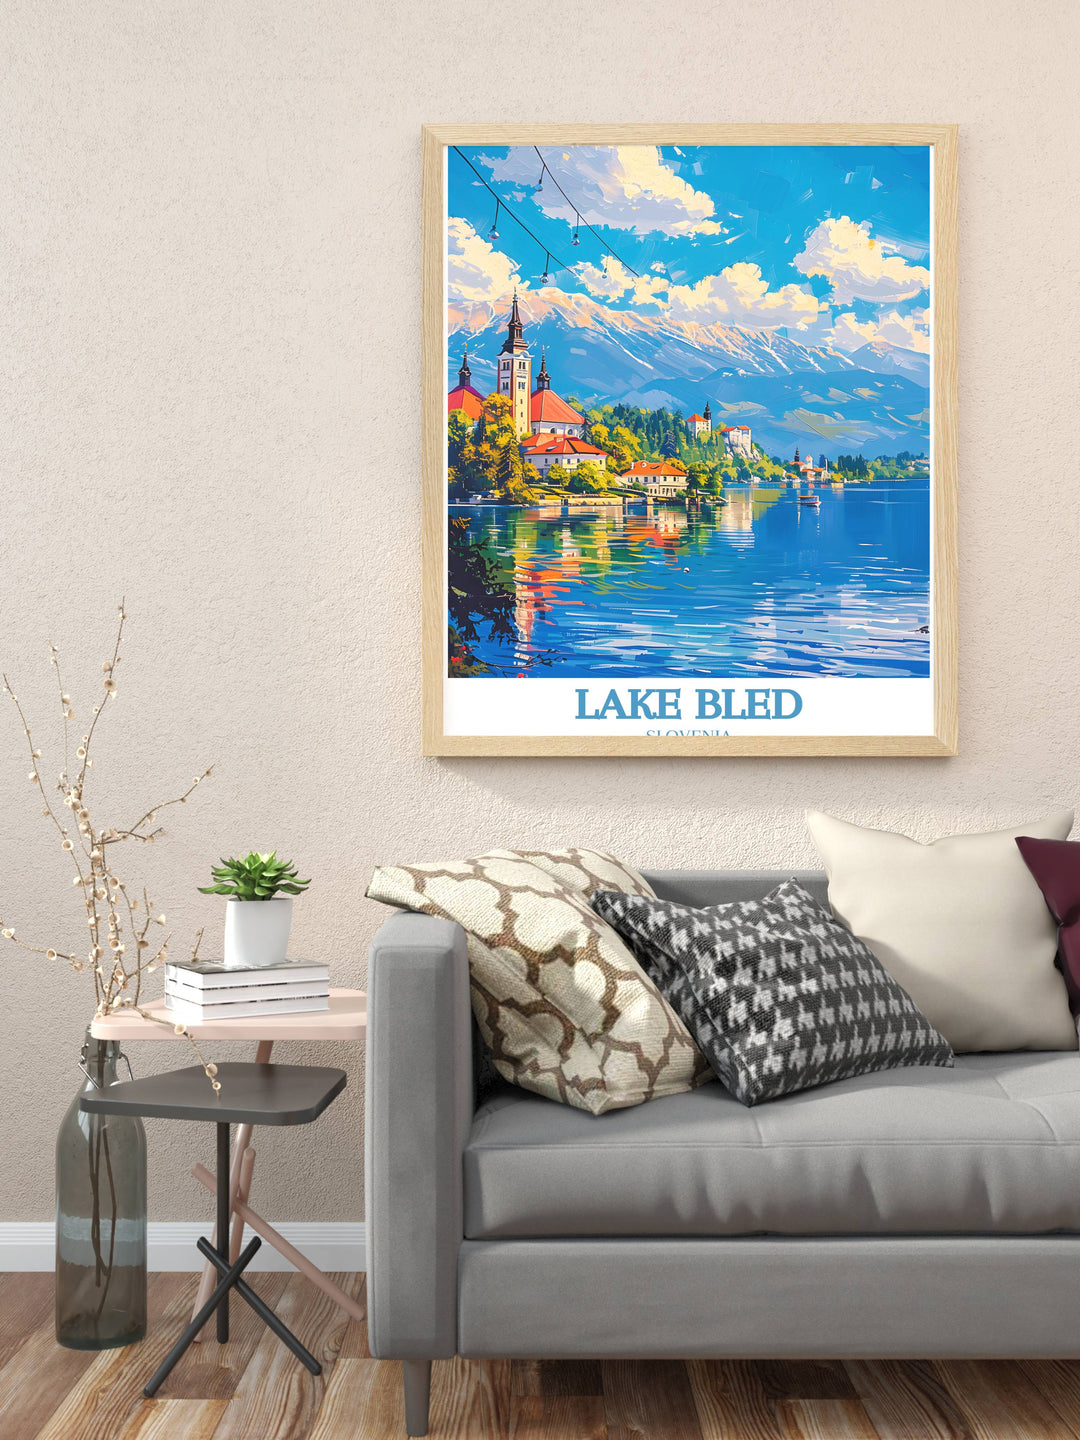 Classic view of Lake Bled during autumn with vibrant foliage colors in a Slovenia Art Print perfect for seasonal decor, bringing the rich, warm colors of fall into your home or office, and inspiring appreciation for changing seasons